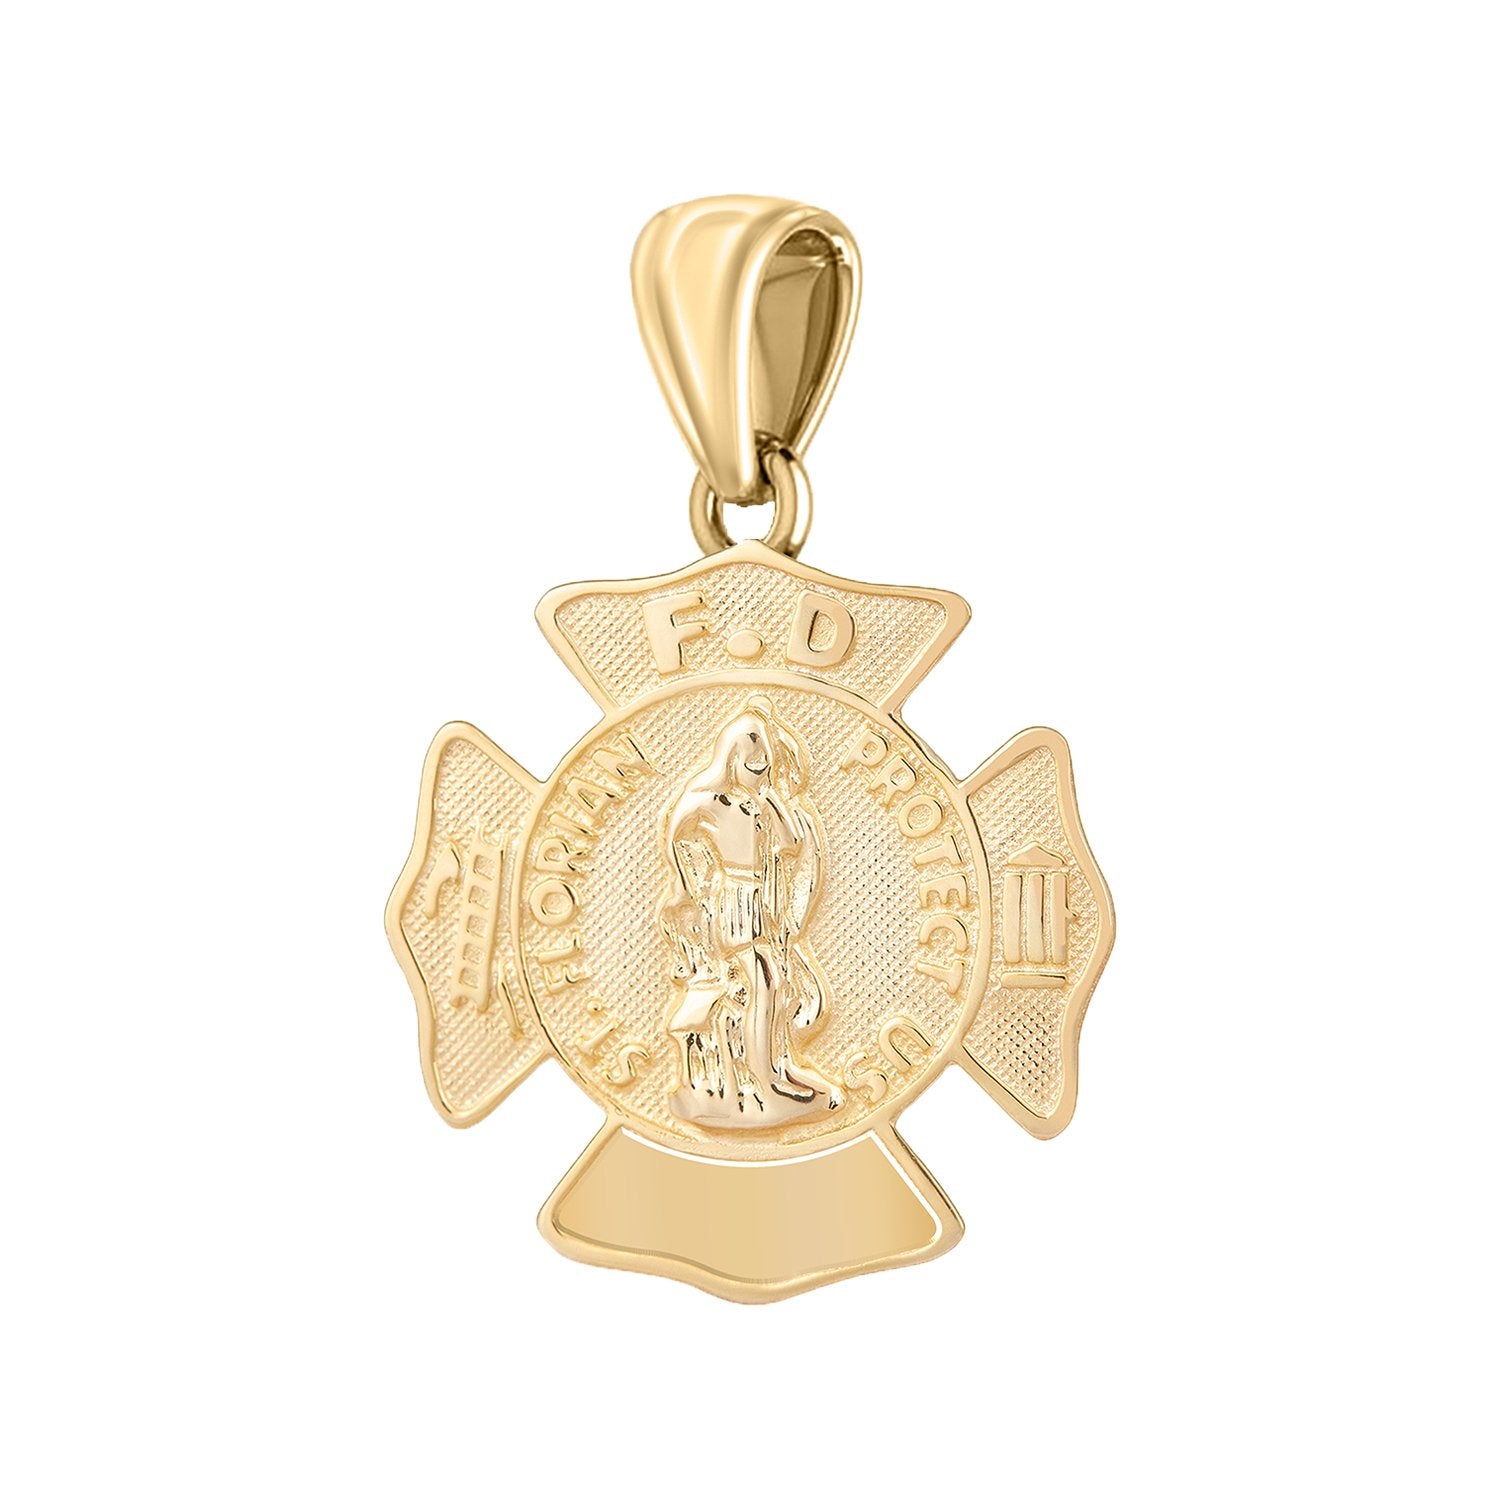 Firefighter Pendant In Gold With Chain - Pendant Only